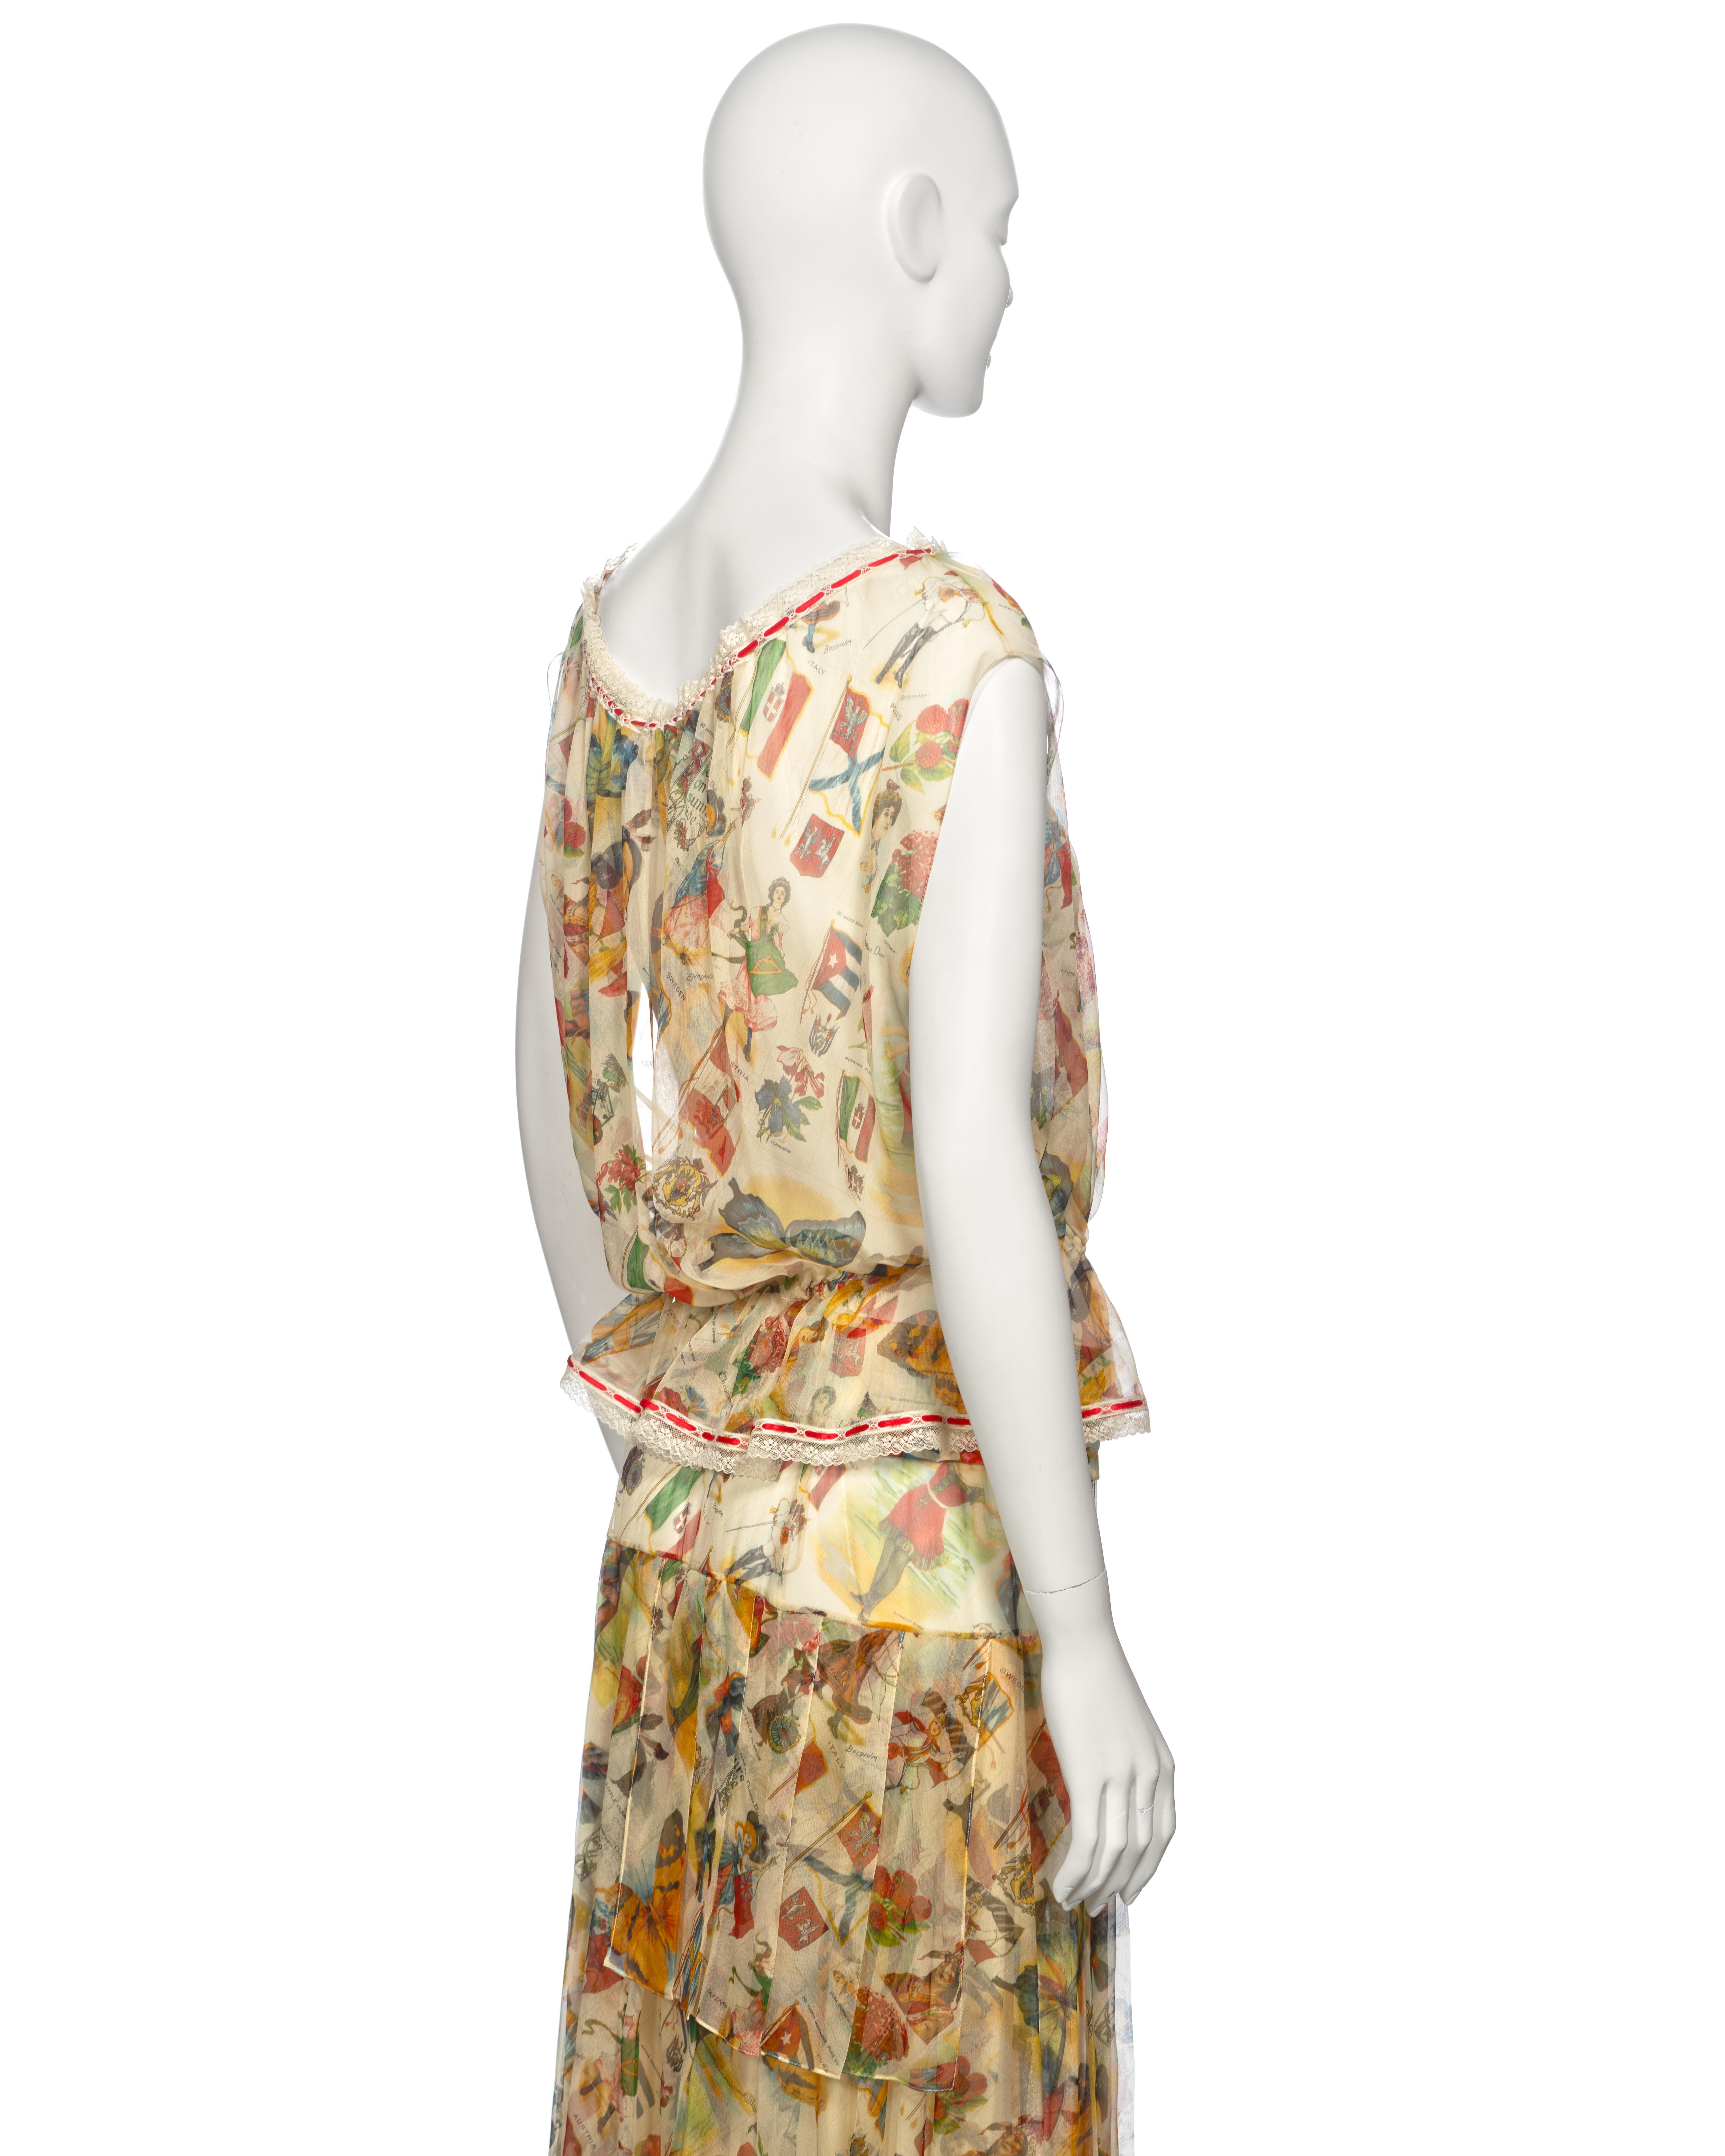 Christian Dior by John Galliano Victoria Print Silk Blouse and Skirt, ss 2002 For Sale 5